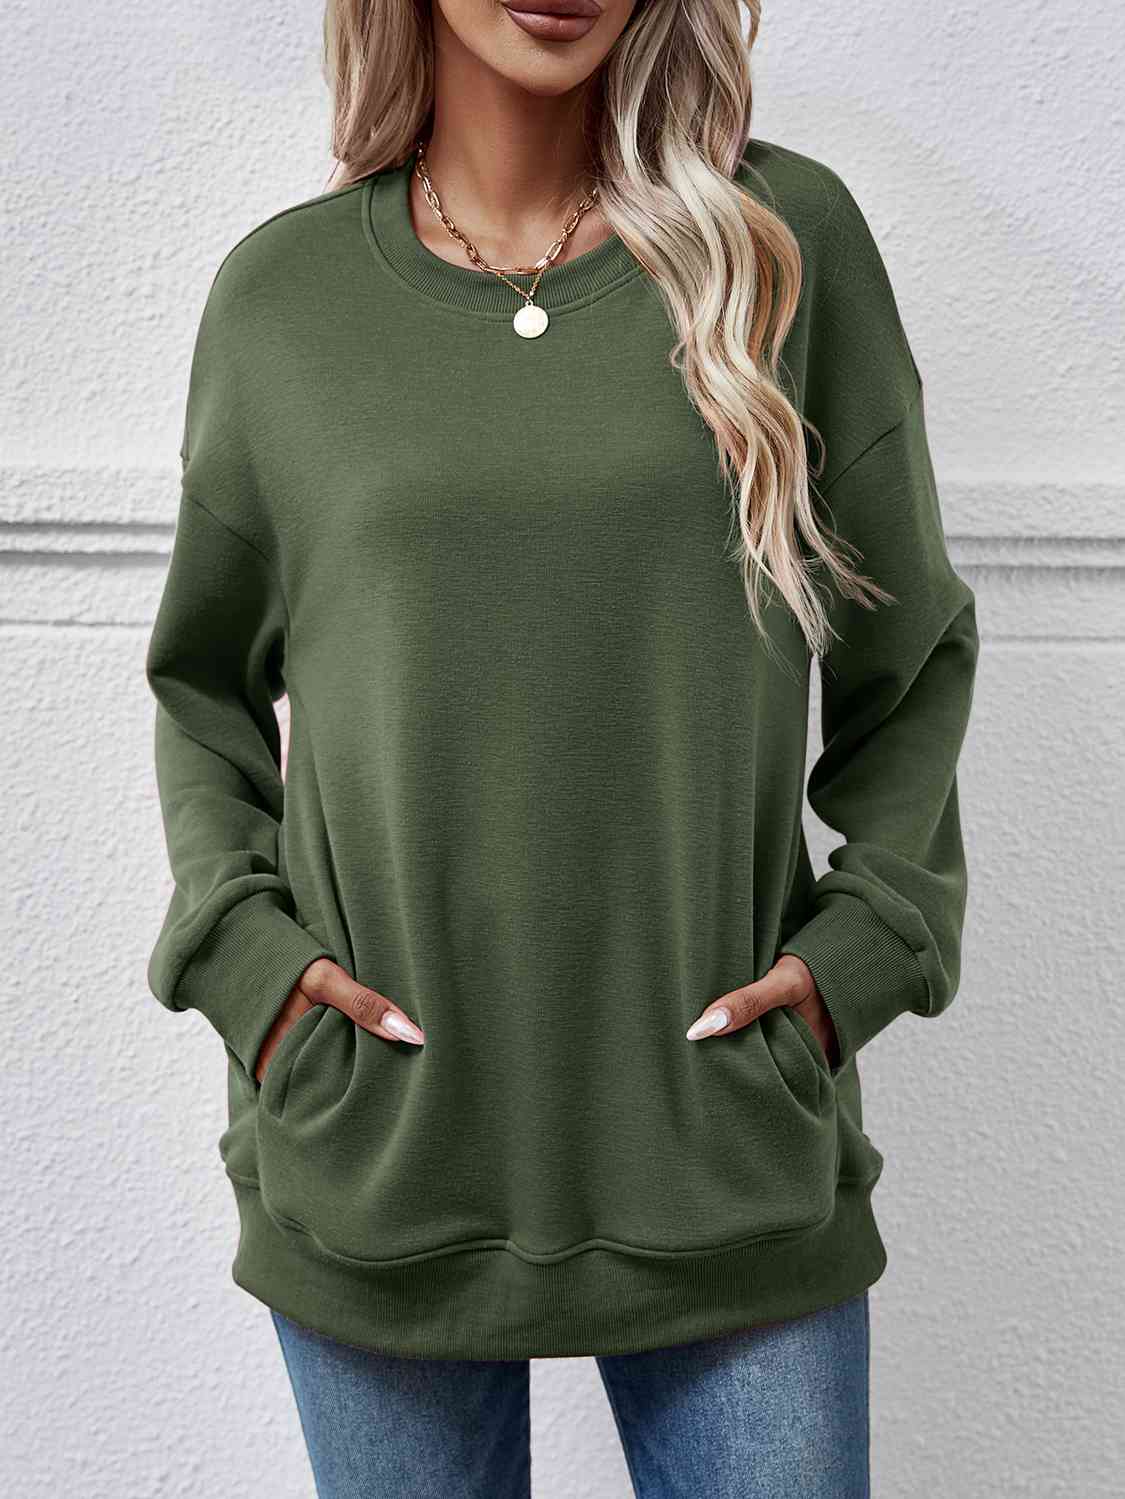 PREORDER- Dropped Shoulder Sweatshirt with Pockets